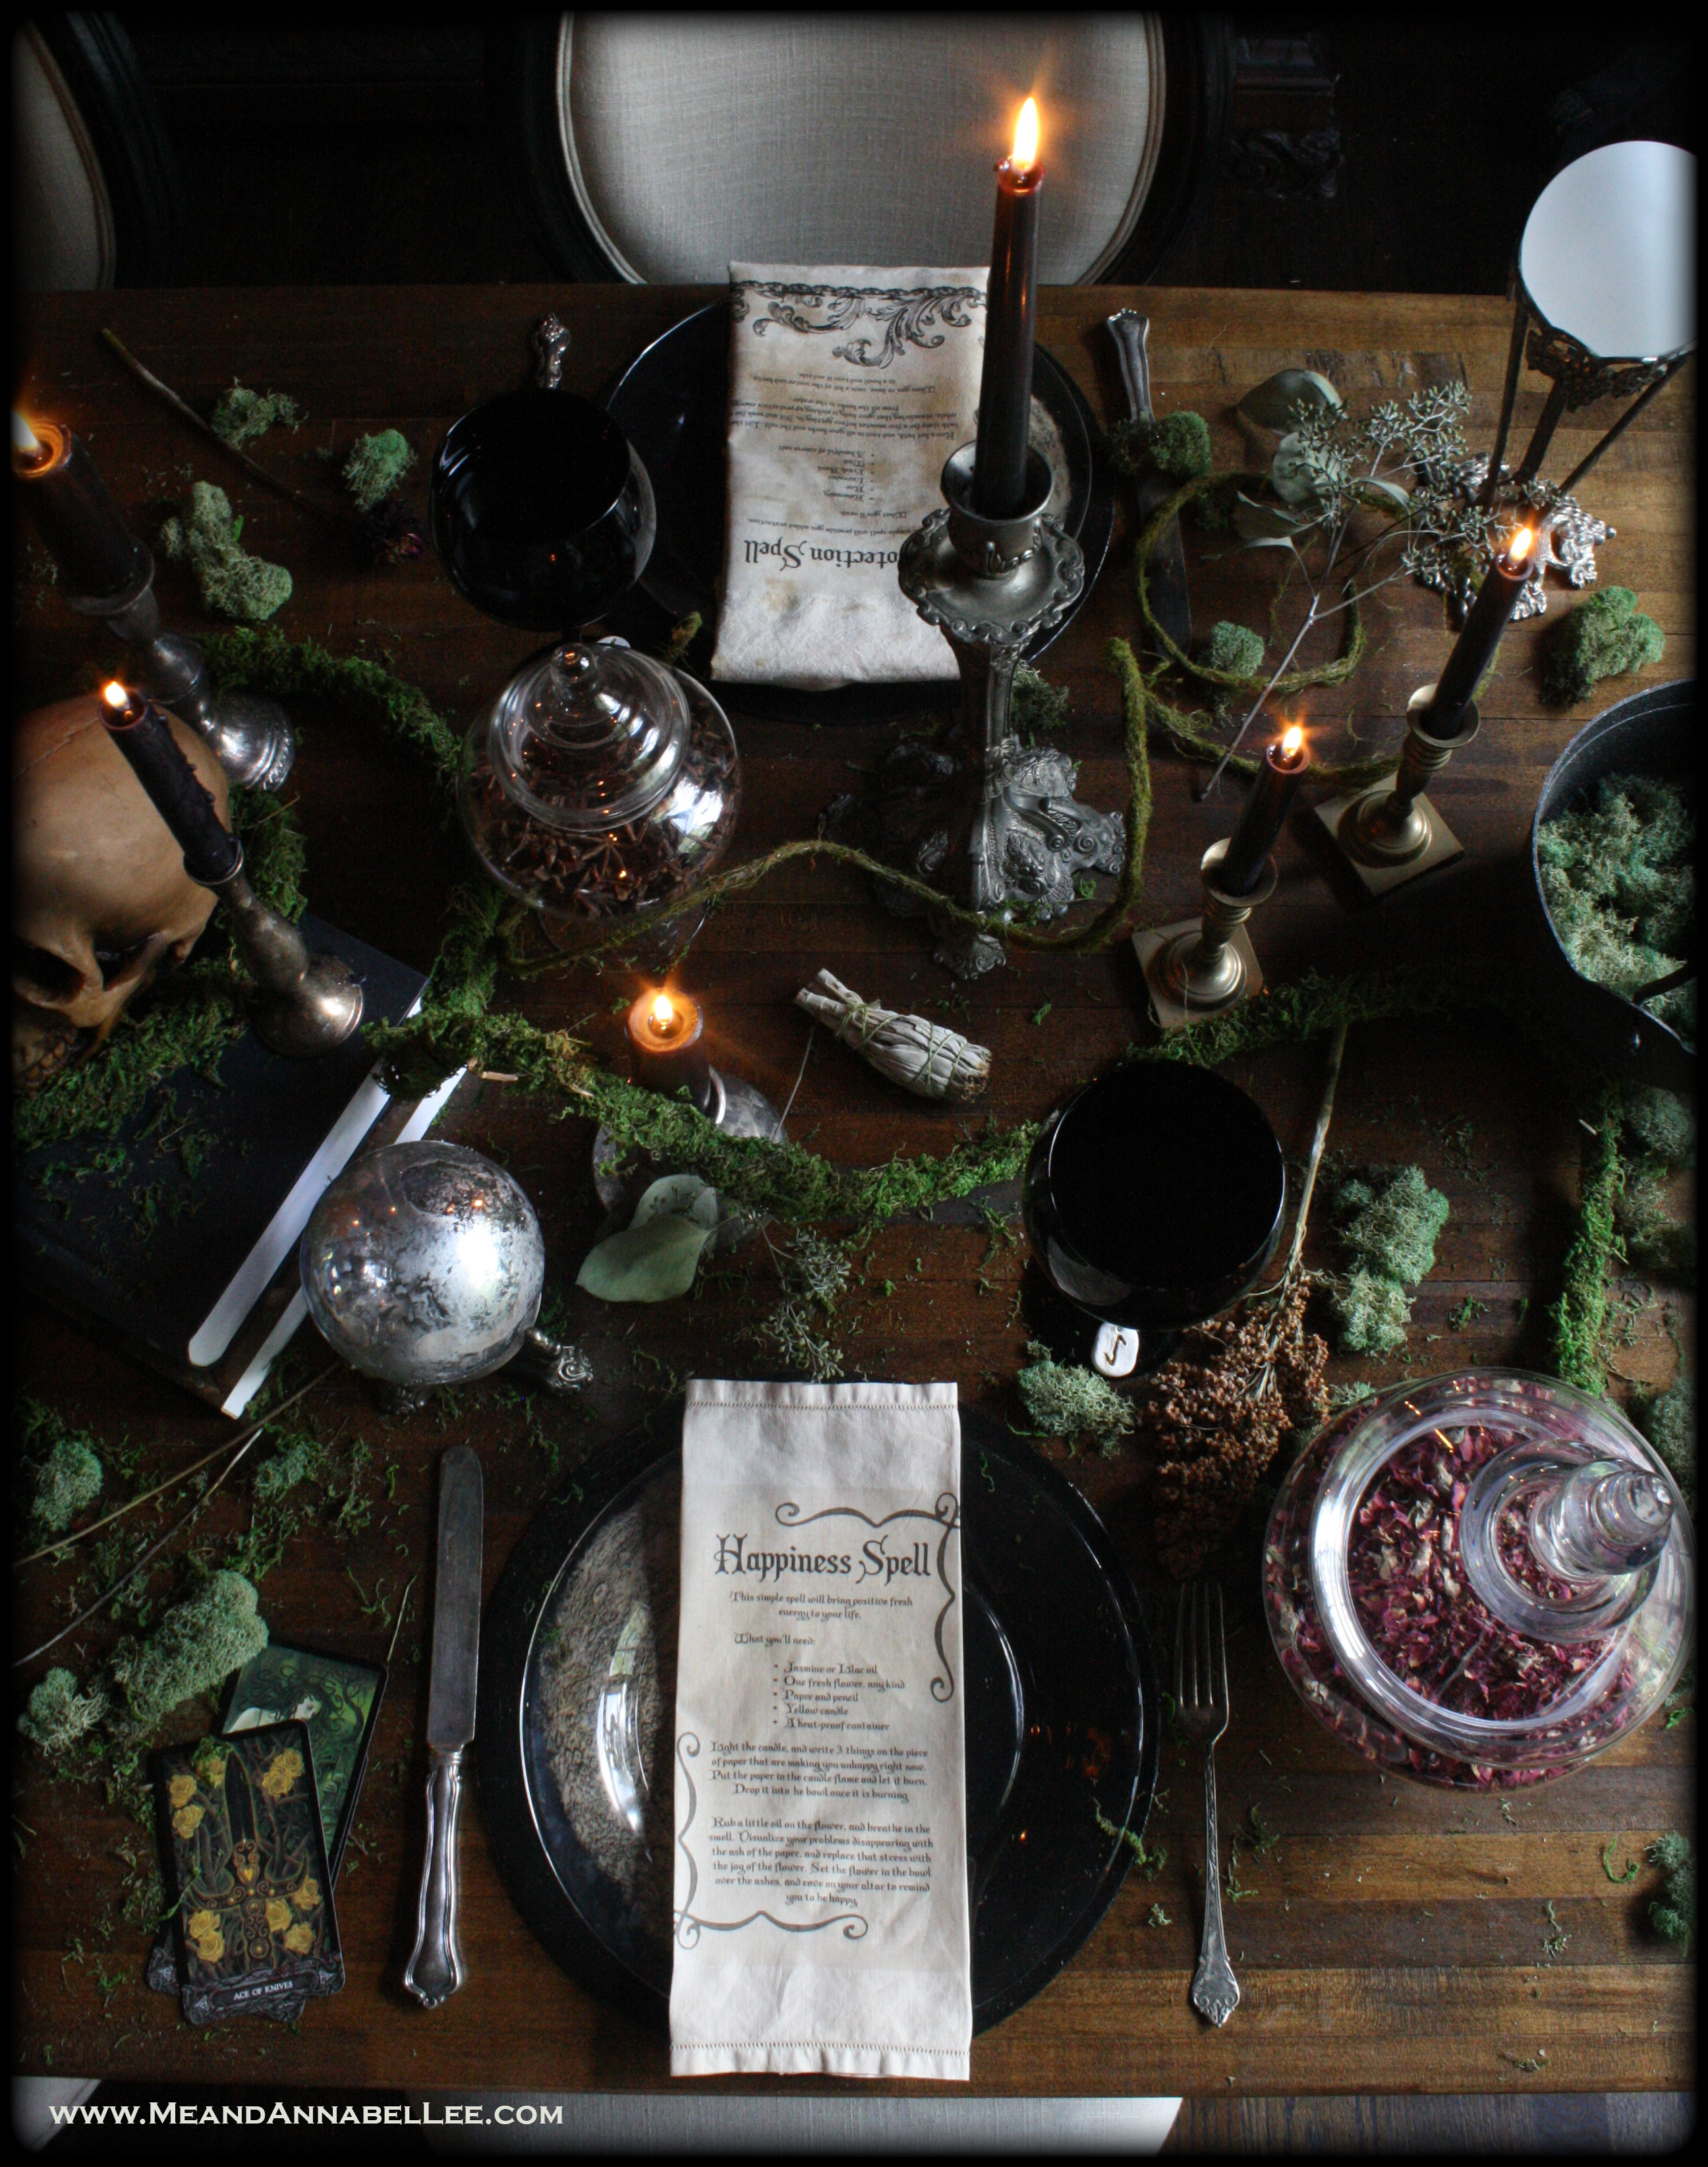 DIY Tea Stained Witches Spell Napkins | Magickal Halloween Dinner Party Table Setting | Happiness Spell | Witchcraft Iron On Image Transfer | www.MeandAnnabelLee.com